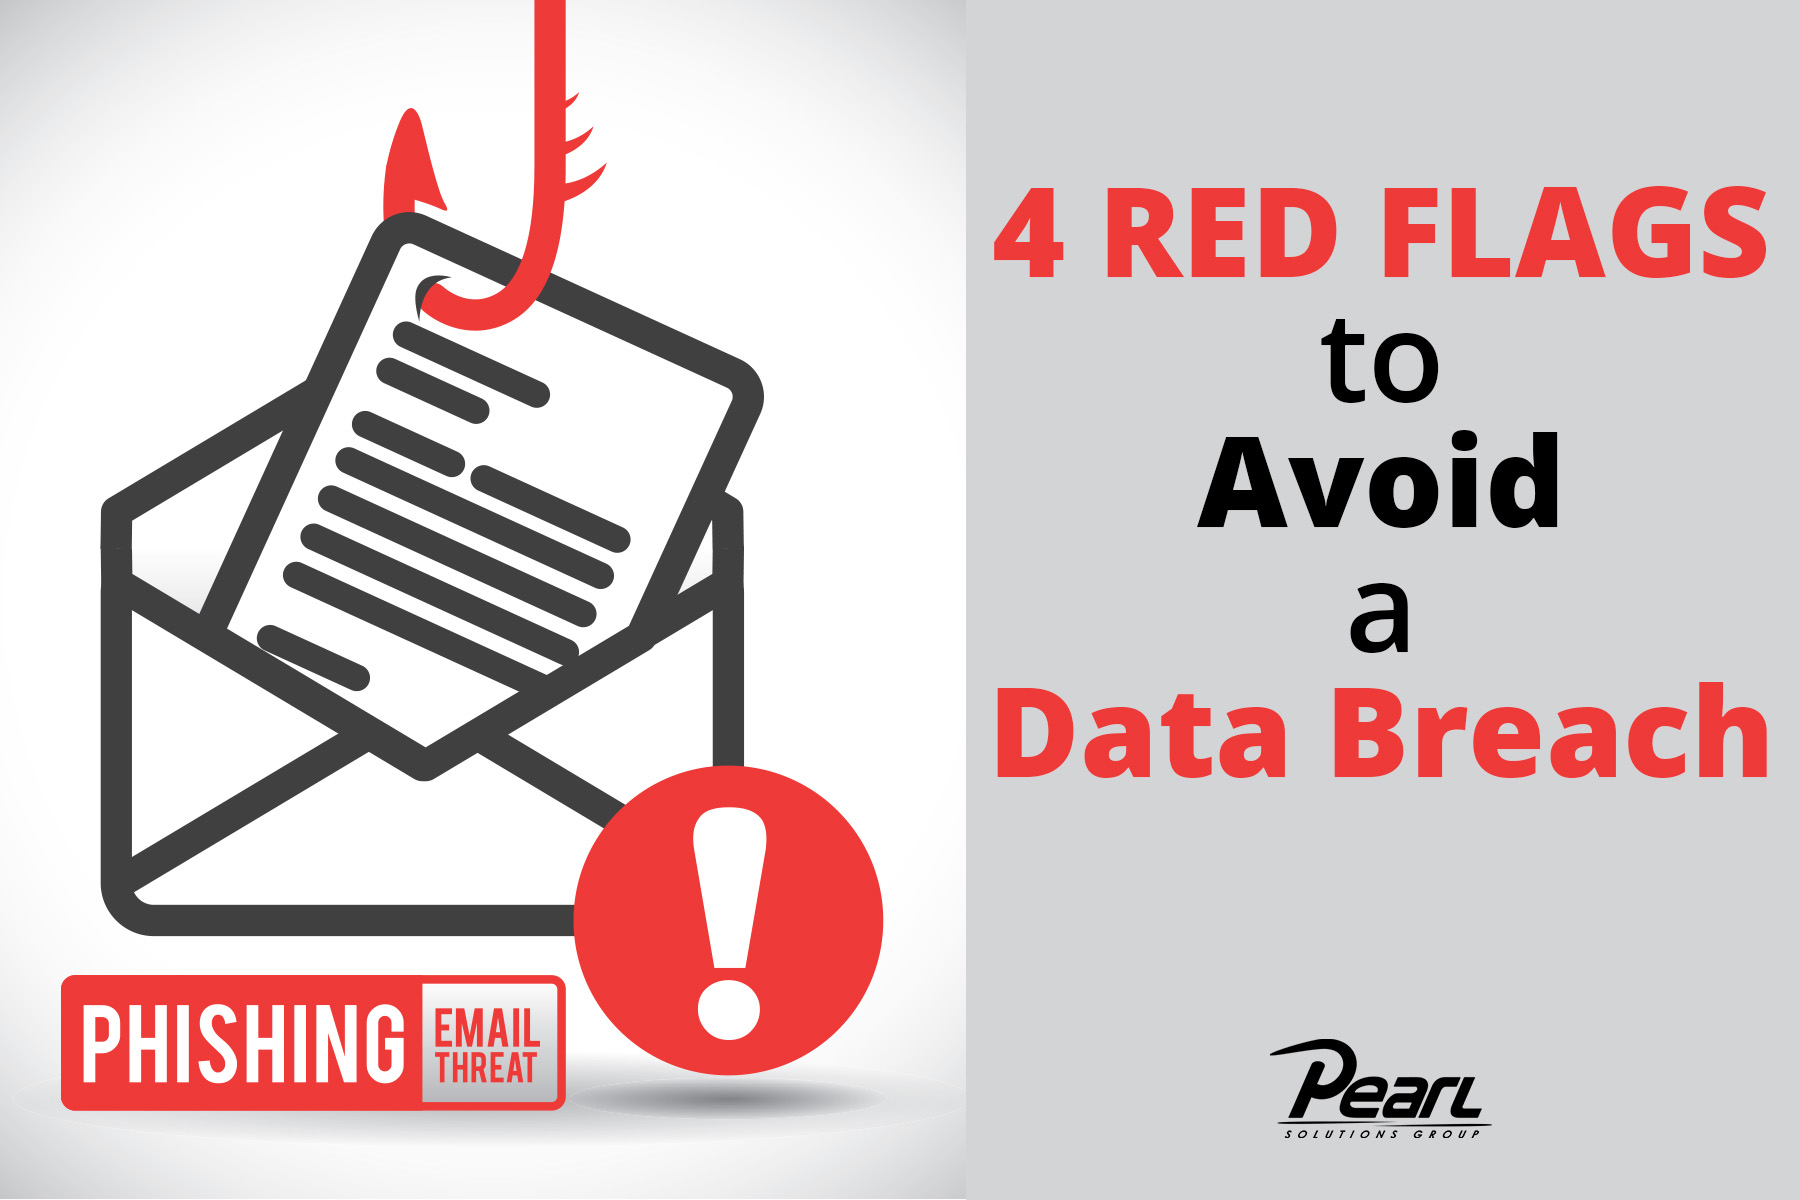 4 Red Flags to Avoid a Data Breach